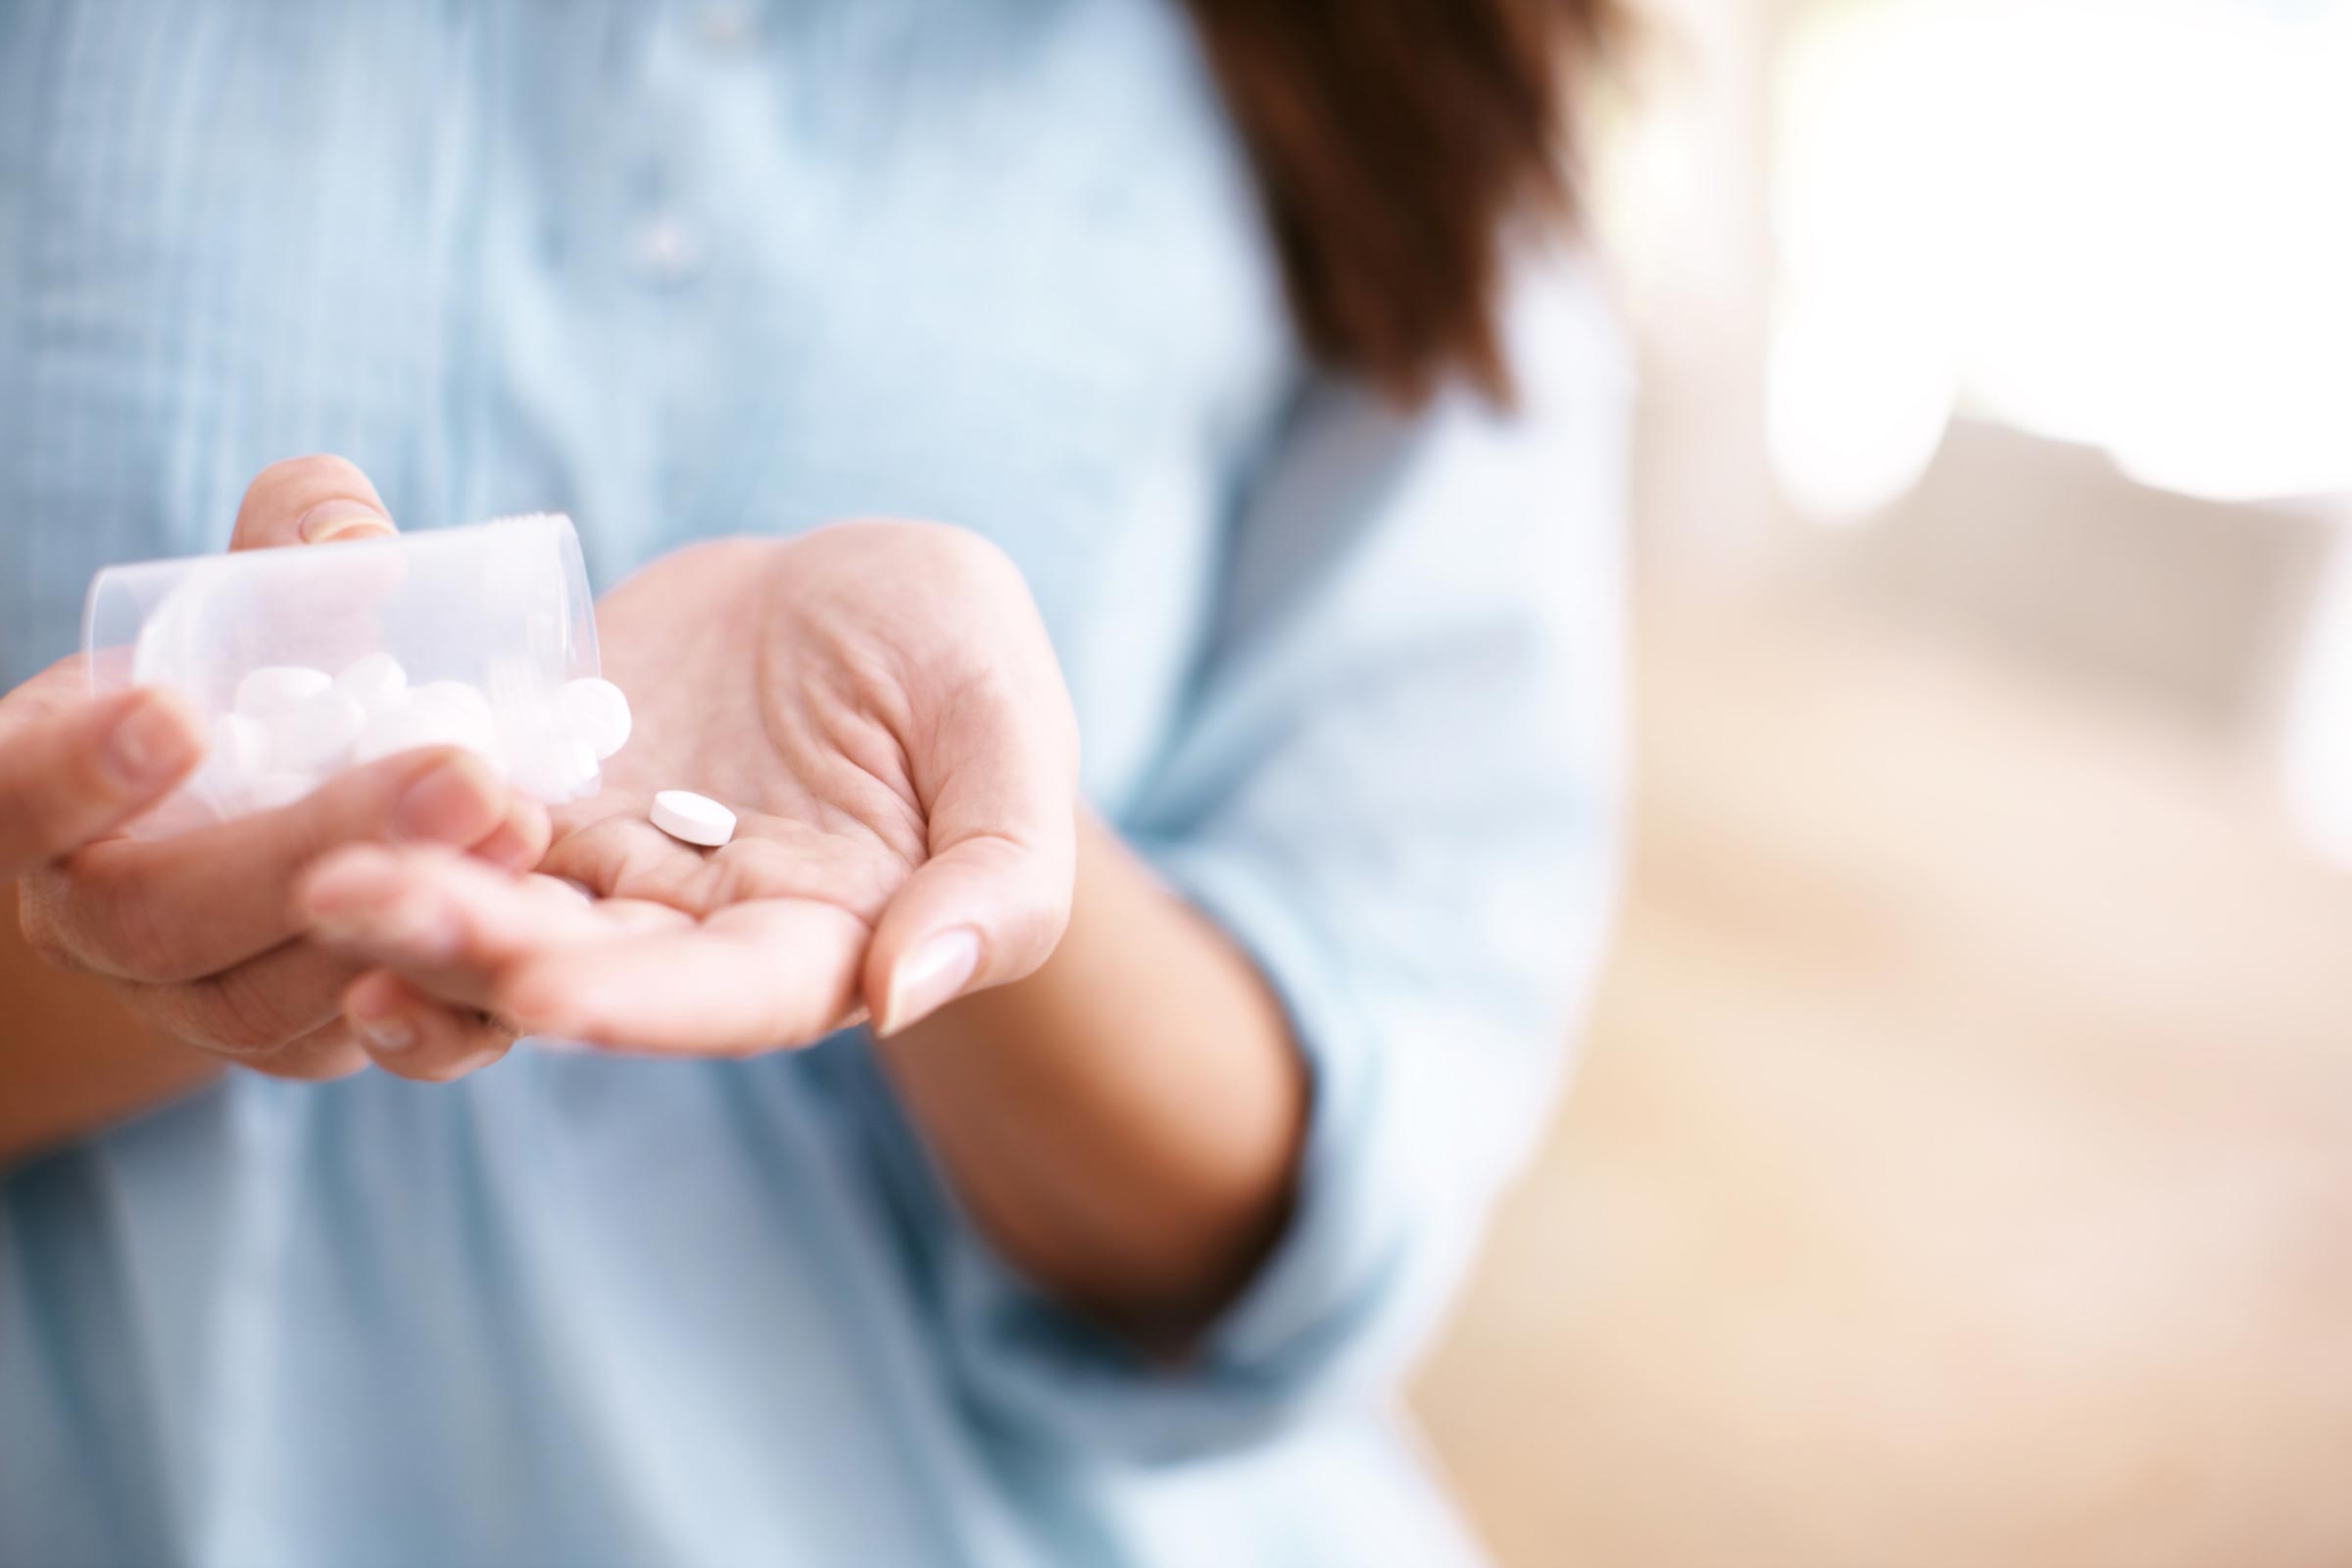 The Danger of Swallowing Pills Without Water | Reader's Digest